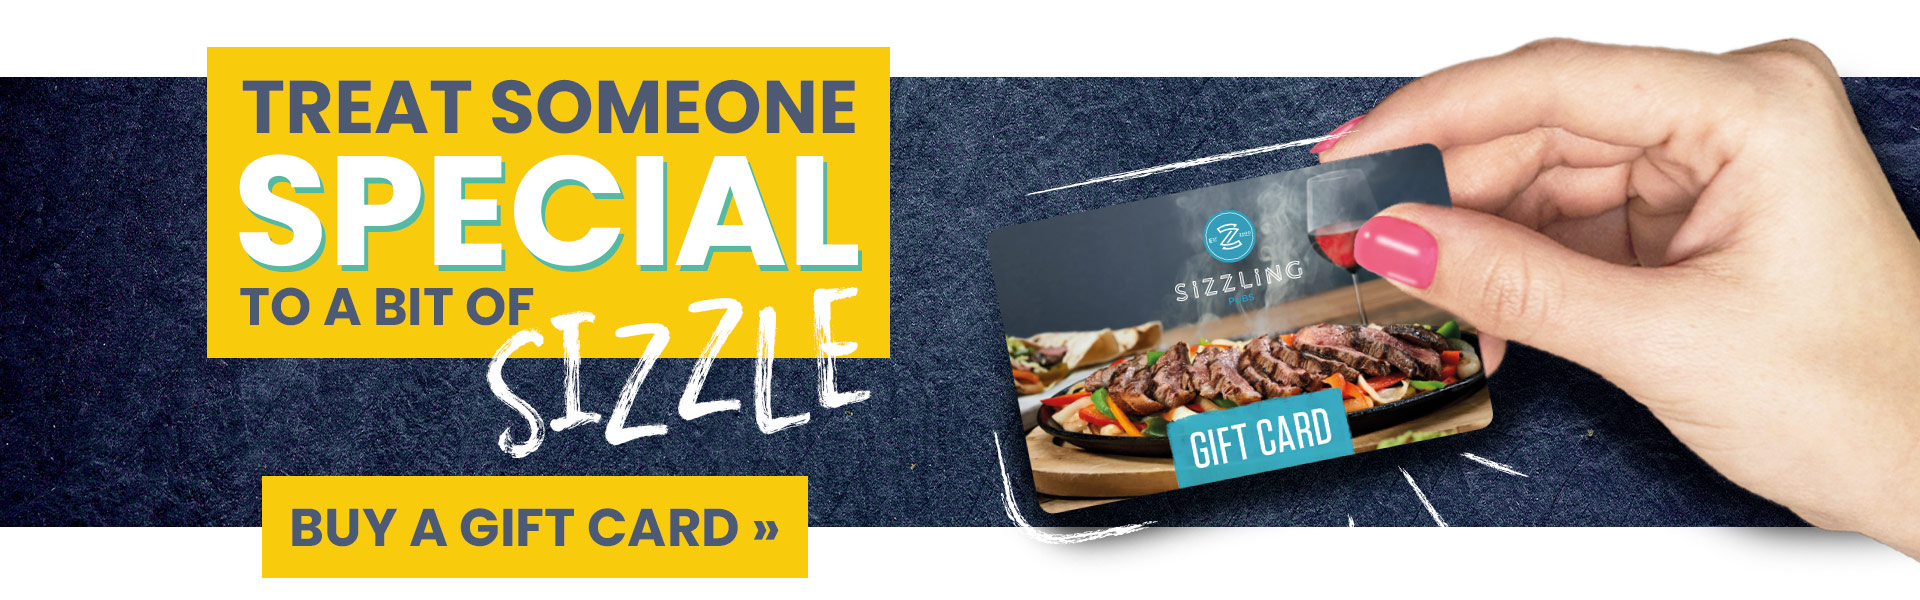 sizzling-giftcard-midpage-banner.jpg